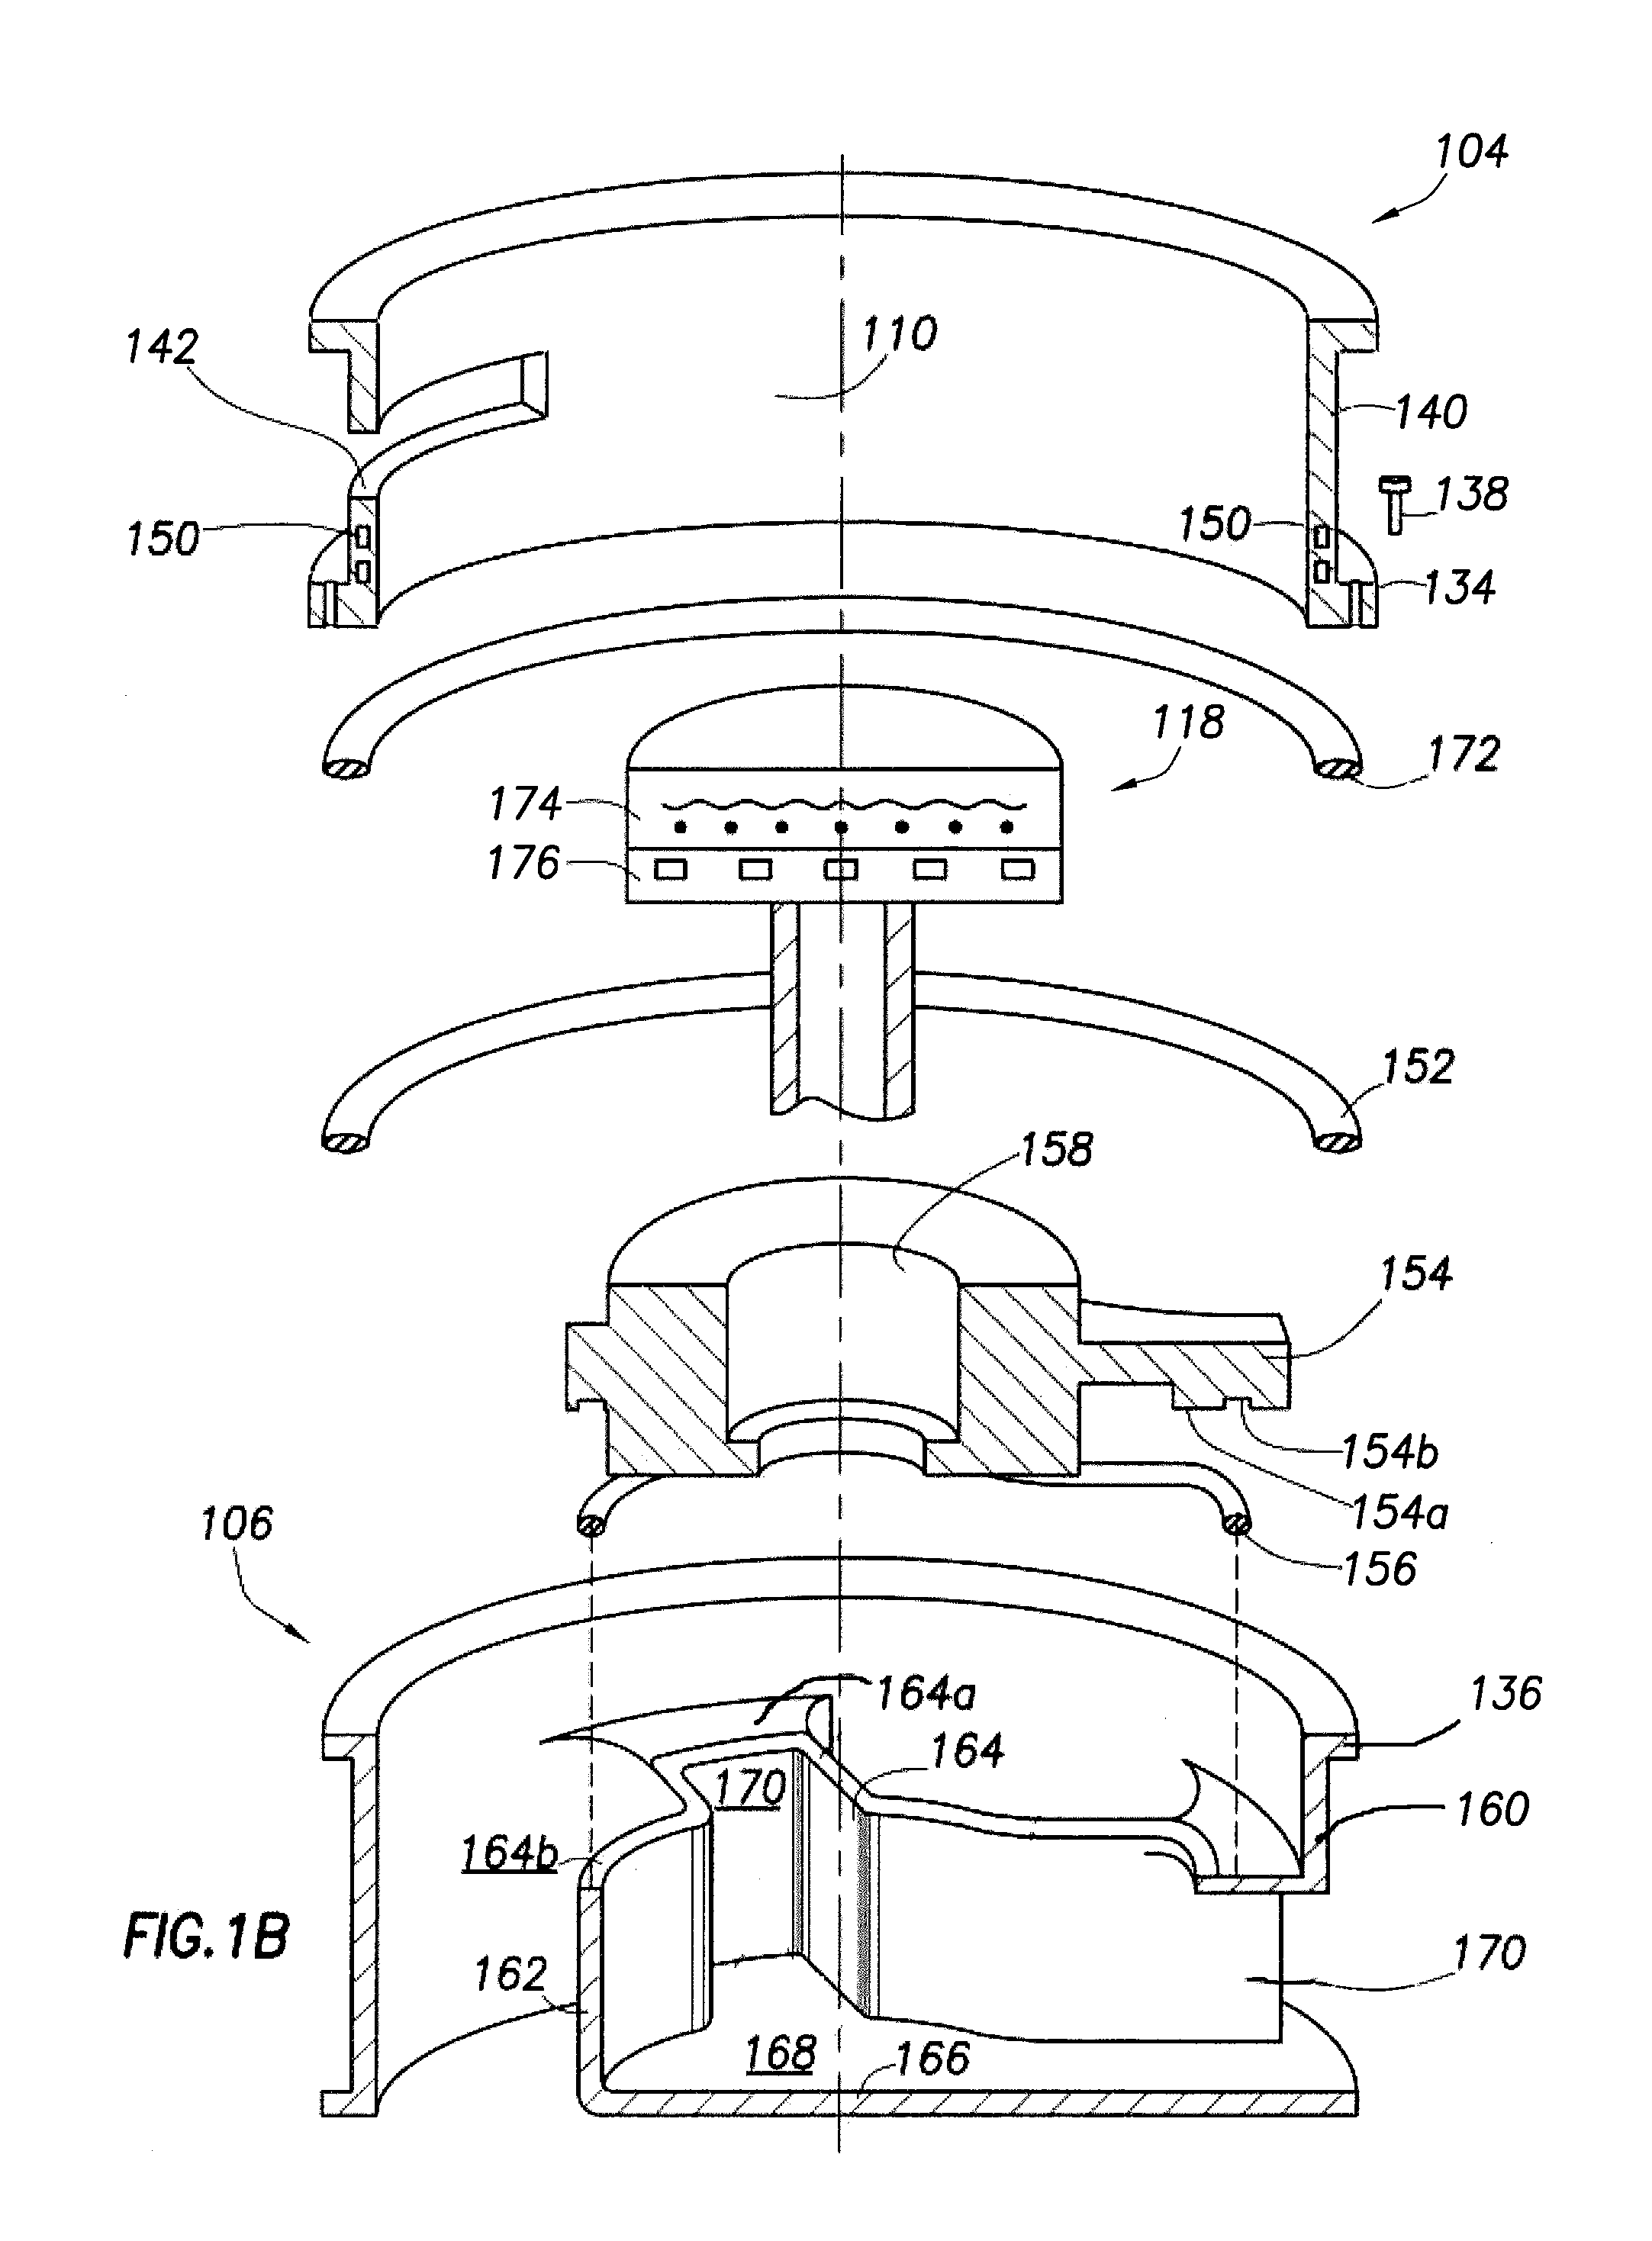 Symmetric chamber body design architecture to address variable process volume with improved flow uniformity/gas conductance